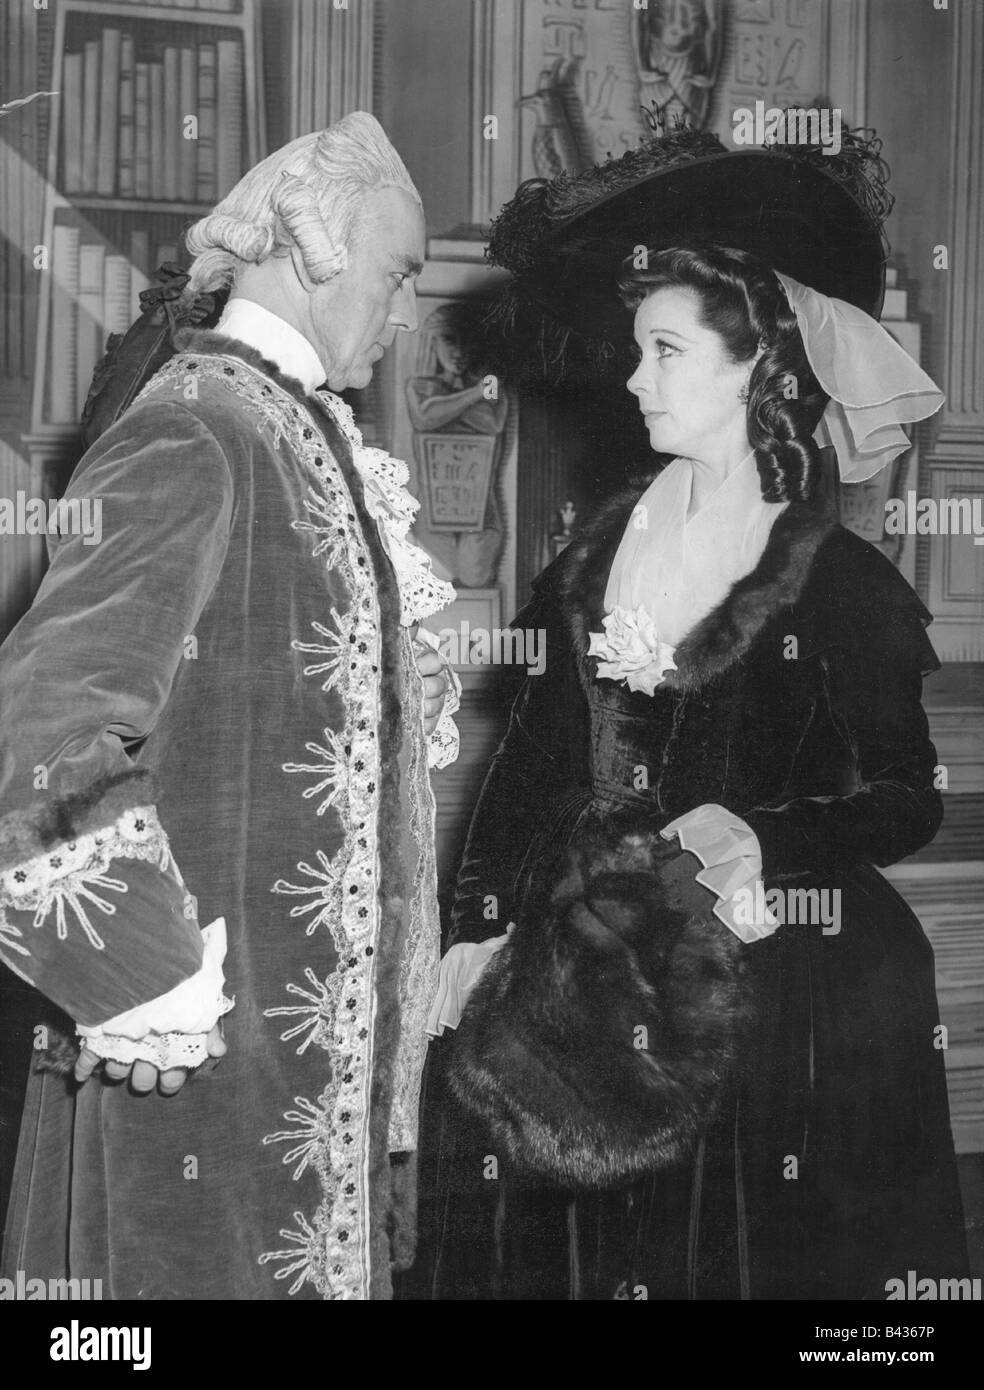 Guinness, Alec, 2.4.1914 - 5.8.2000, British actor, with Vivien Leigh, rehearsal for play 'The school for scandal', her Majesty's Theater, London, 28.5.1954, , Stock Photo